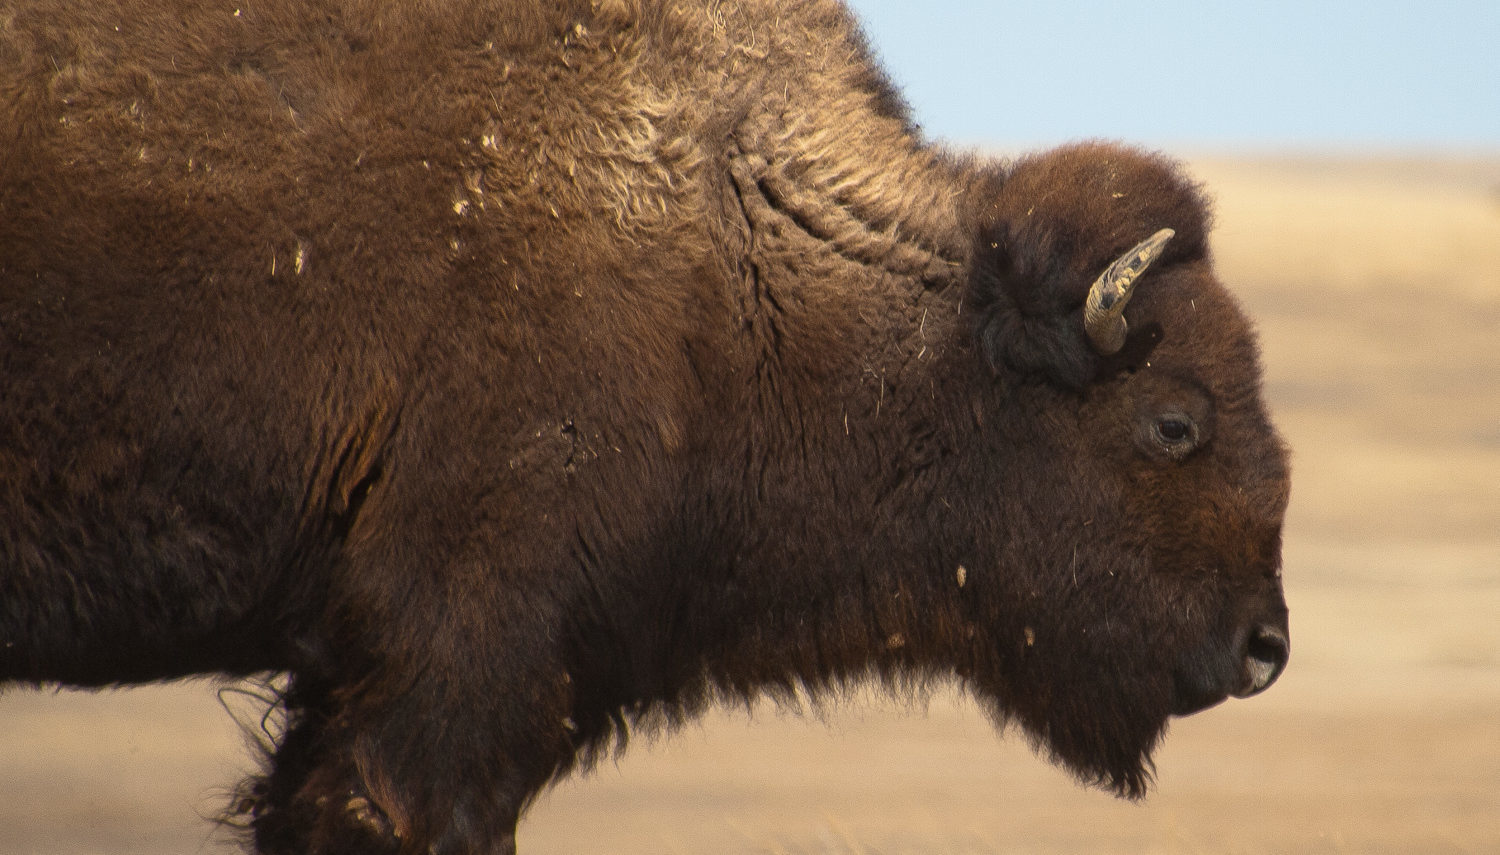 How a General Mills-owned bison bar start up eclipsed the story and business a Native-owned food company. Credit: Flickr / Michael Janke, November 2018